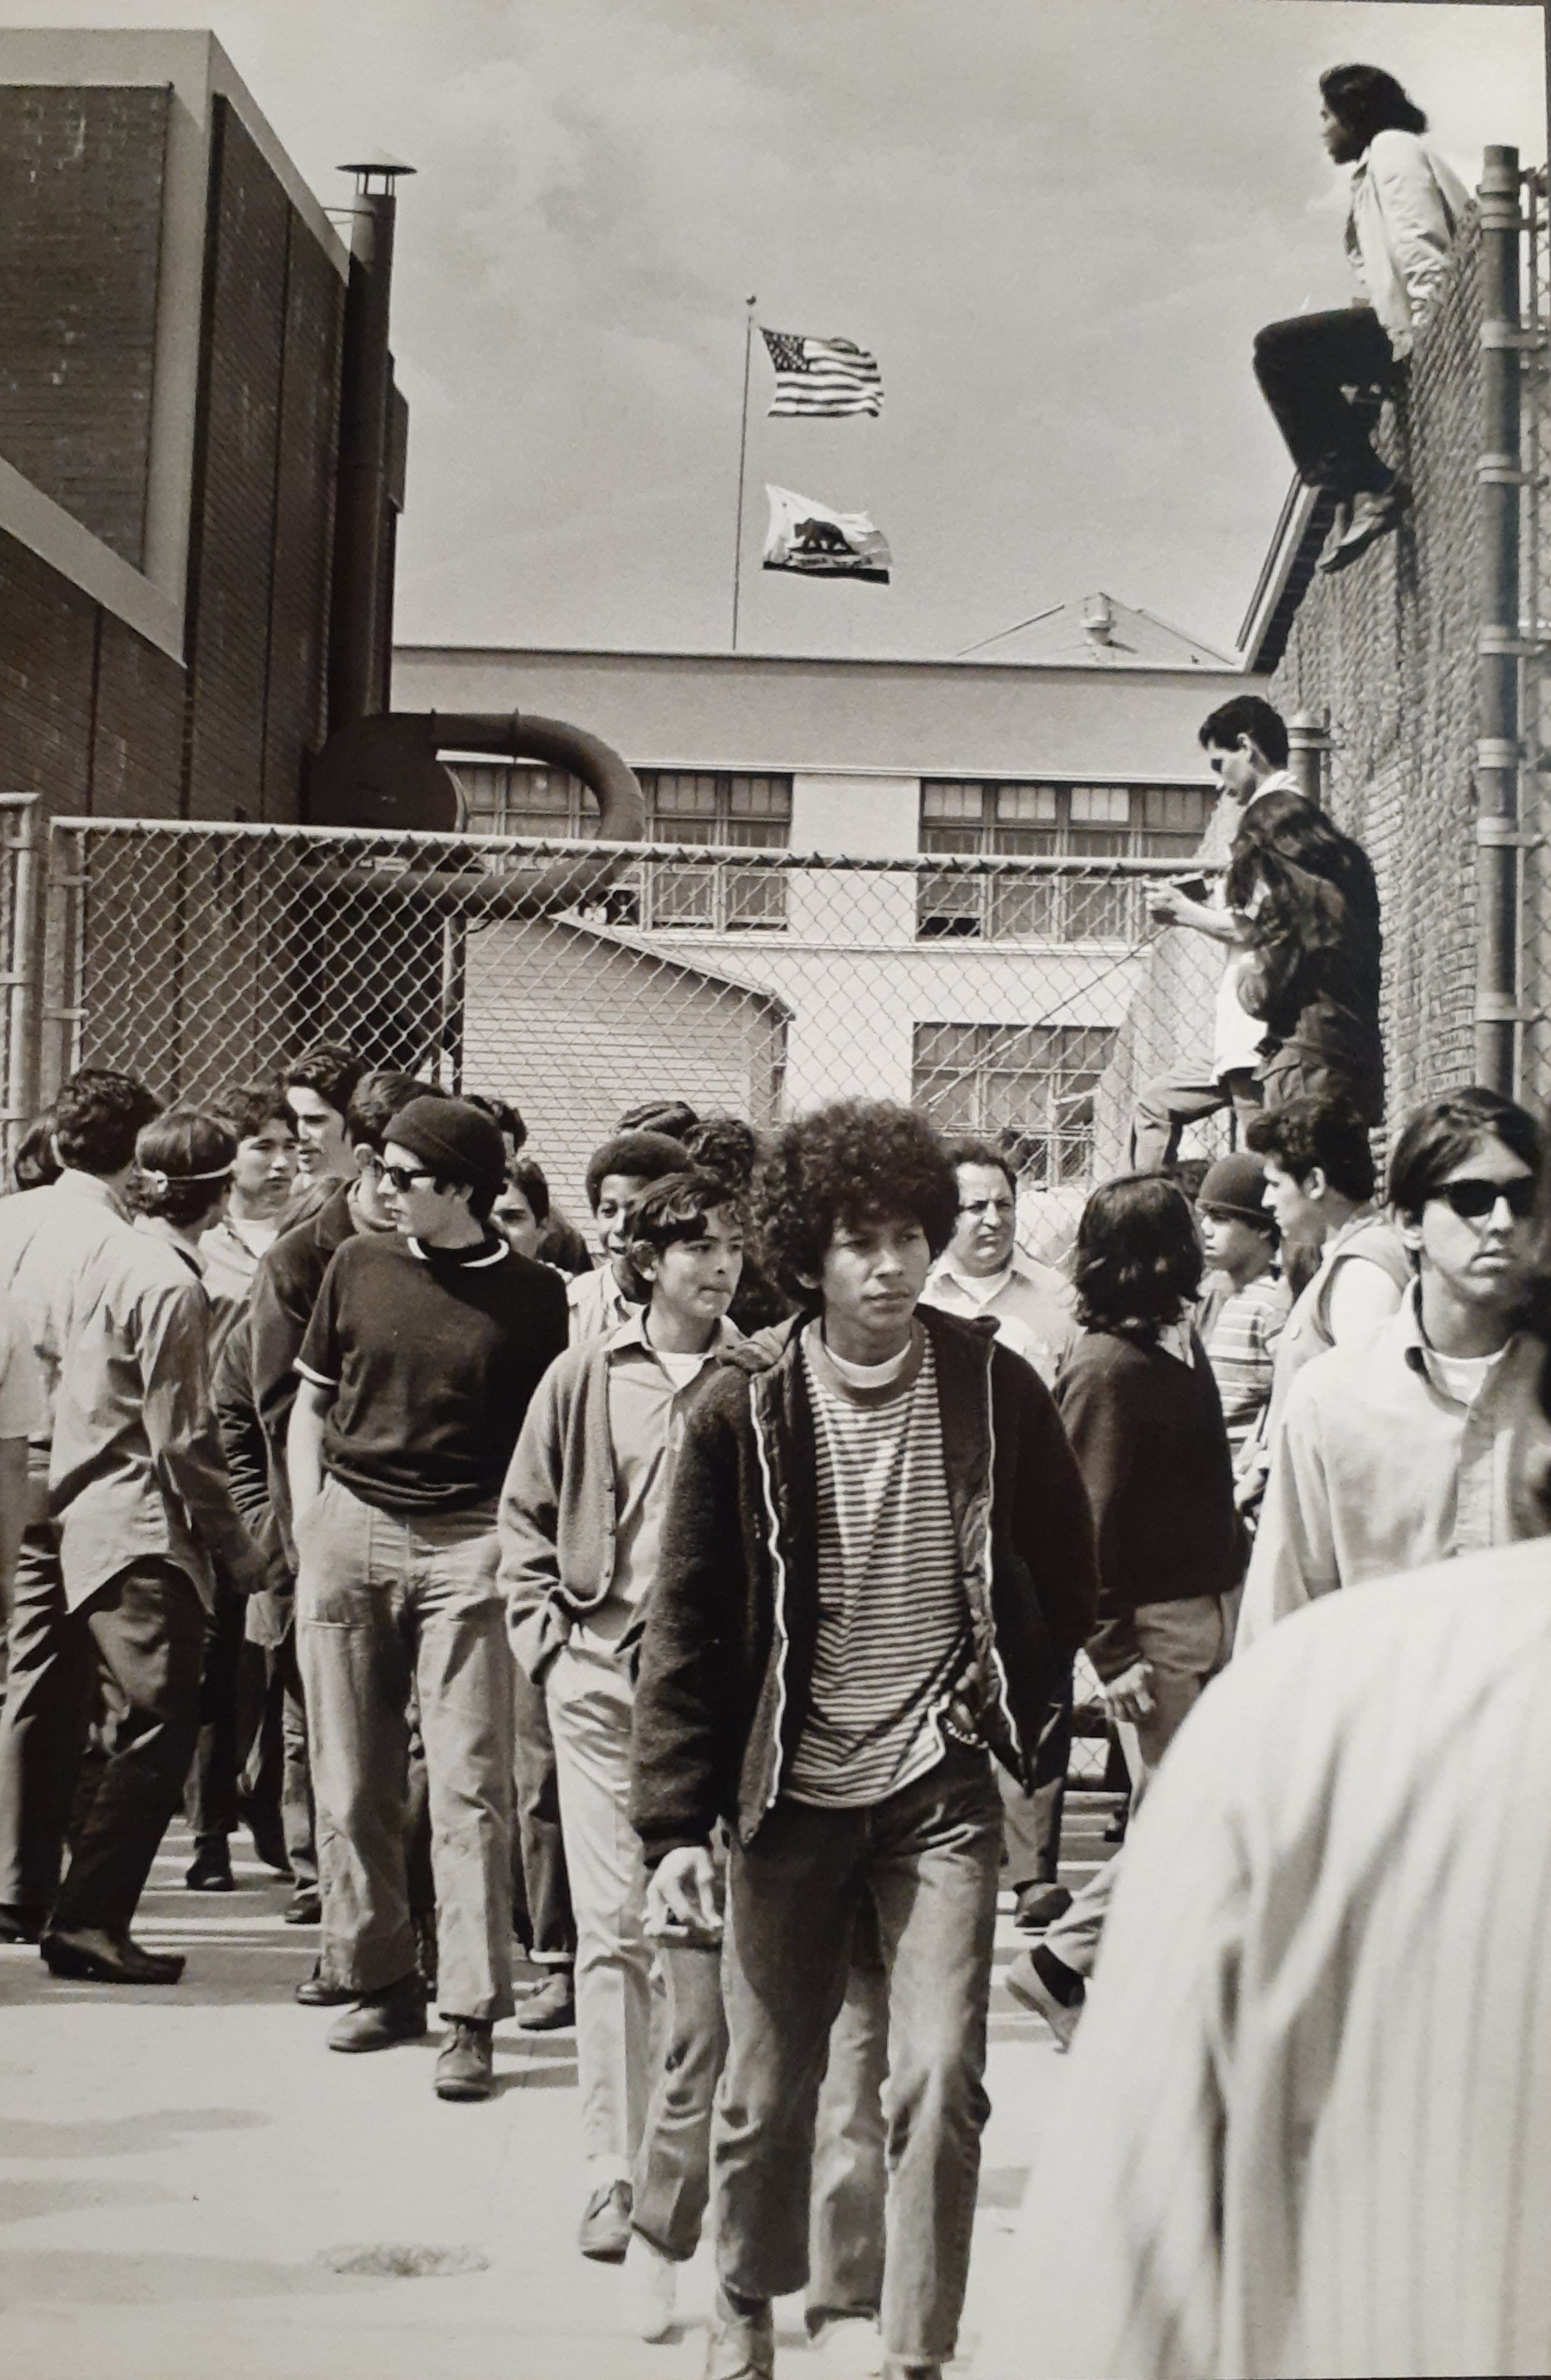 Student walkout, Boyle Heights, 1968